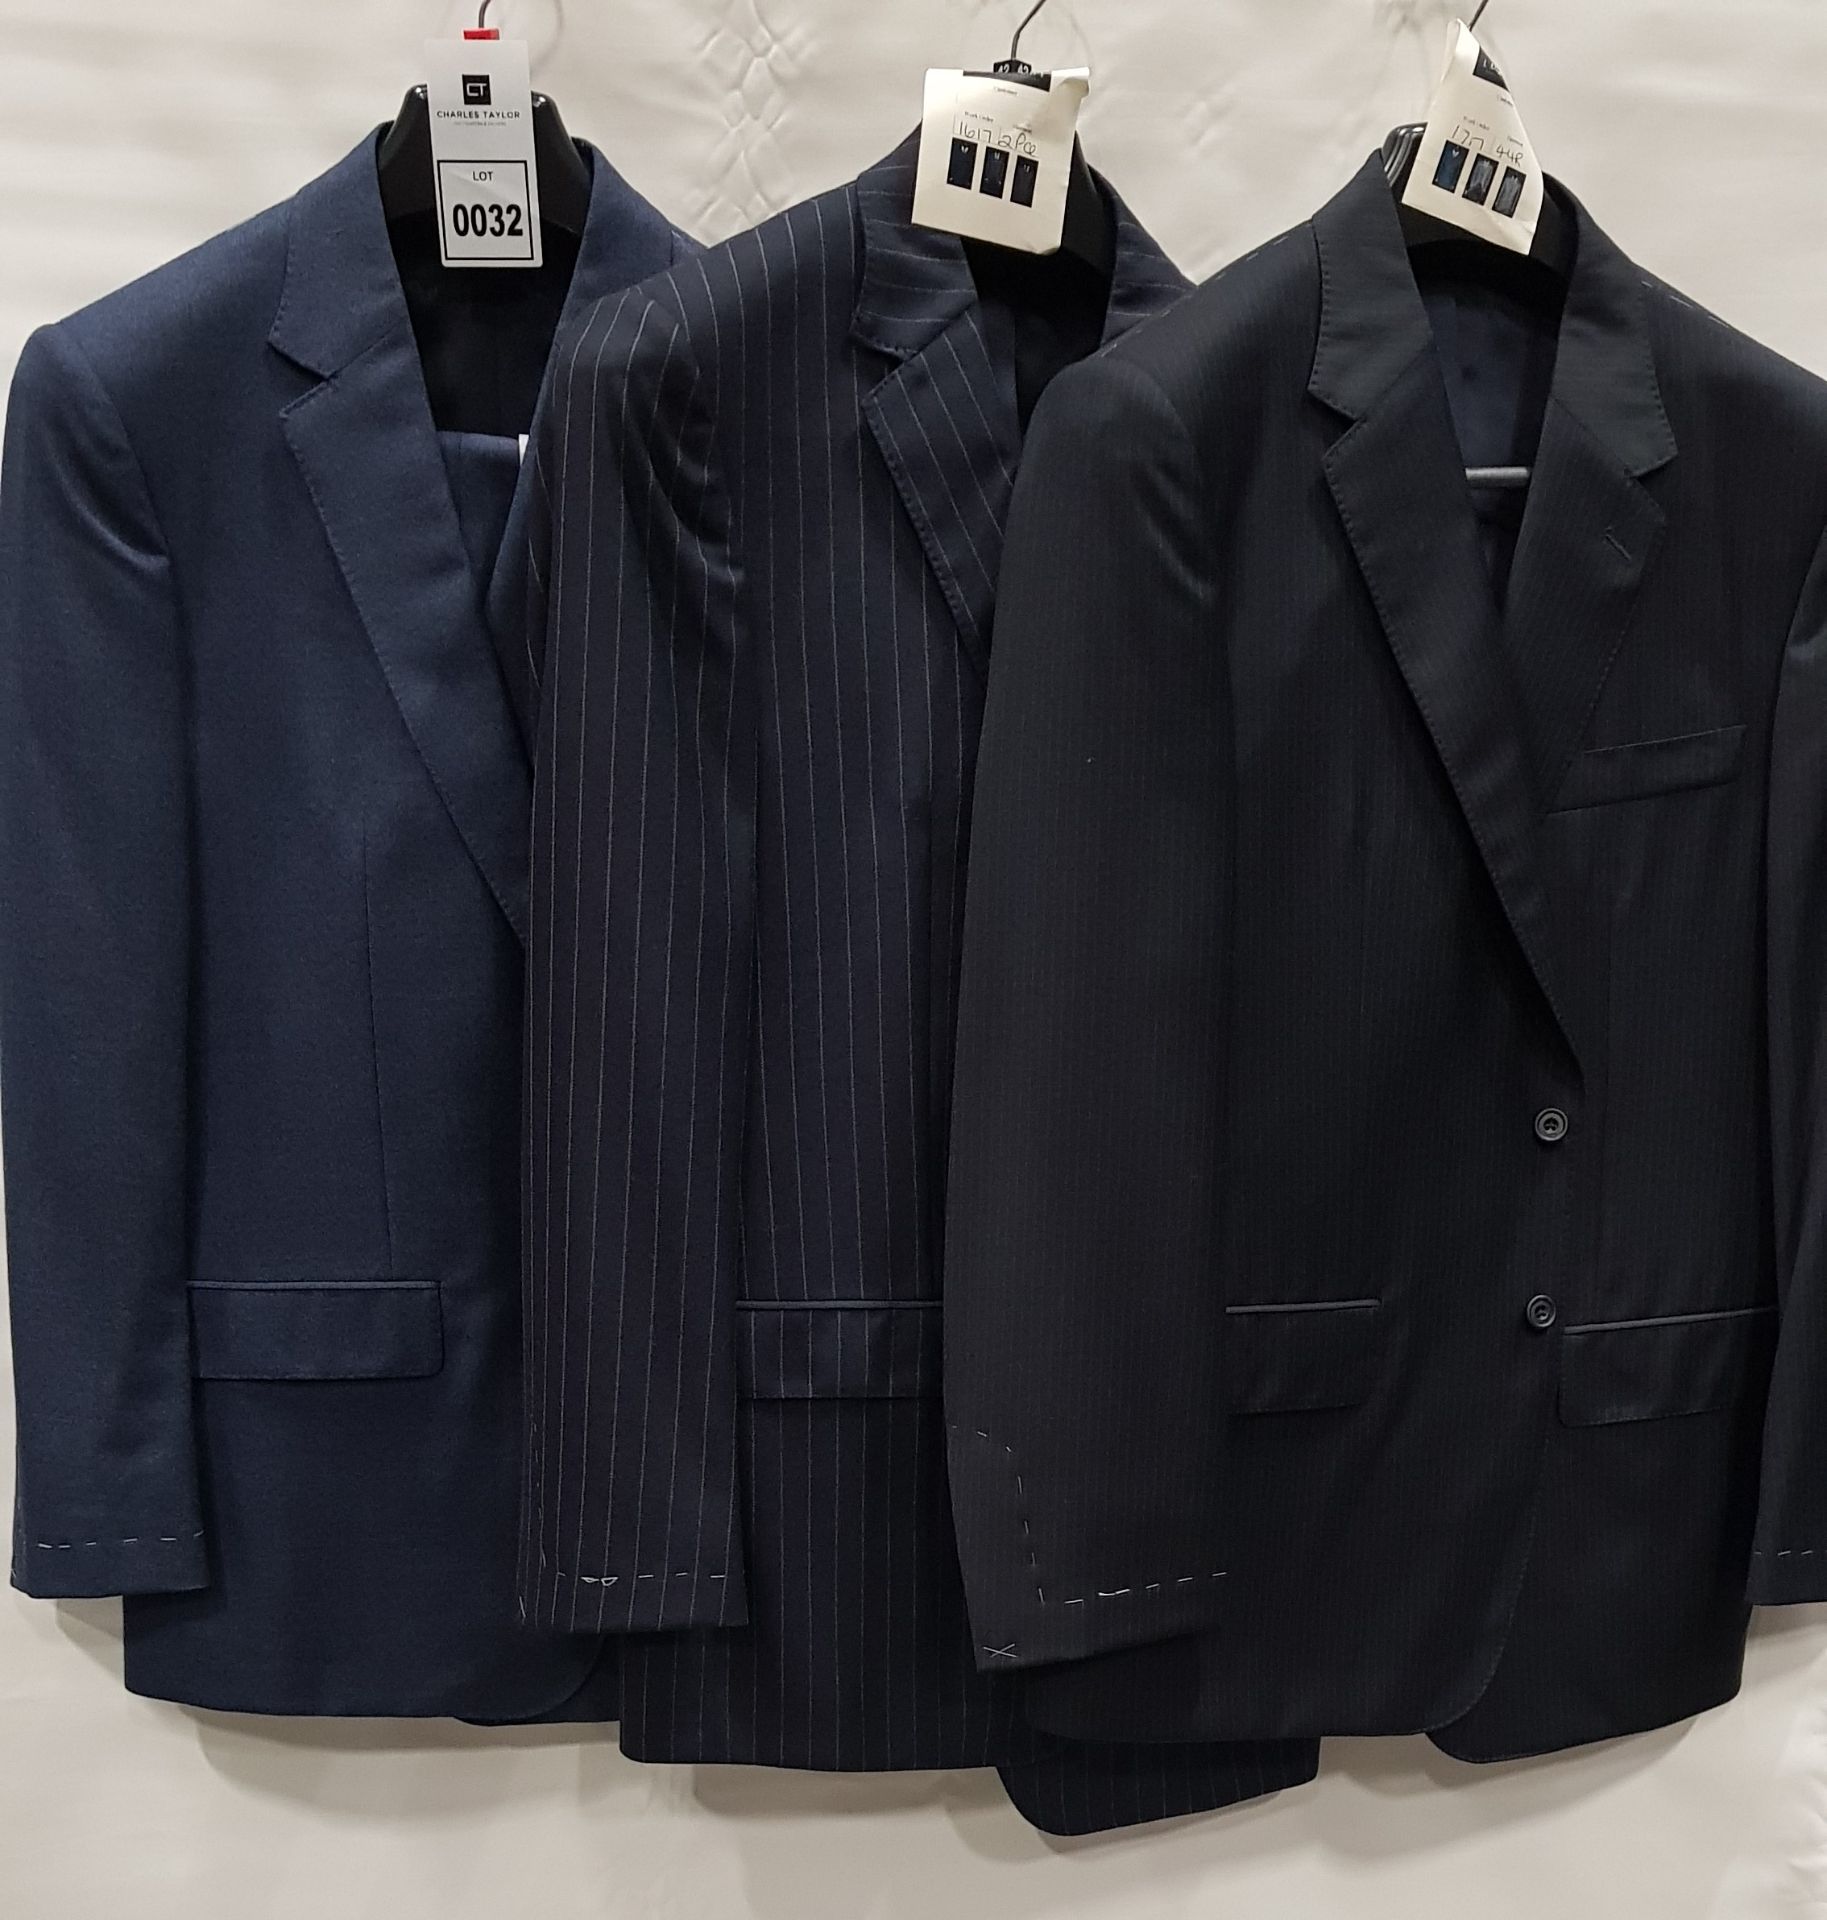 3 X BRAND NEW LUTWYCHE 2 PC DARK BLUE SHADES MATCHING SUITS SIZES 42R, 44R, 42L (NOTE NOT FULLY